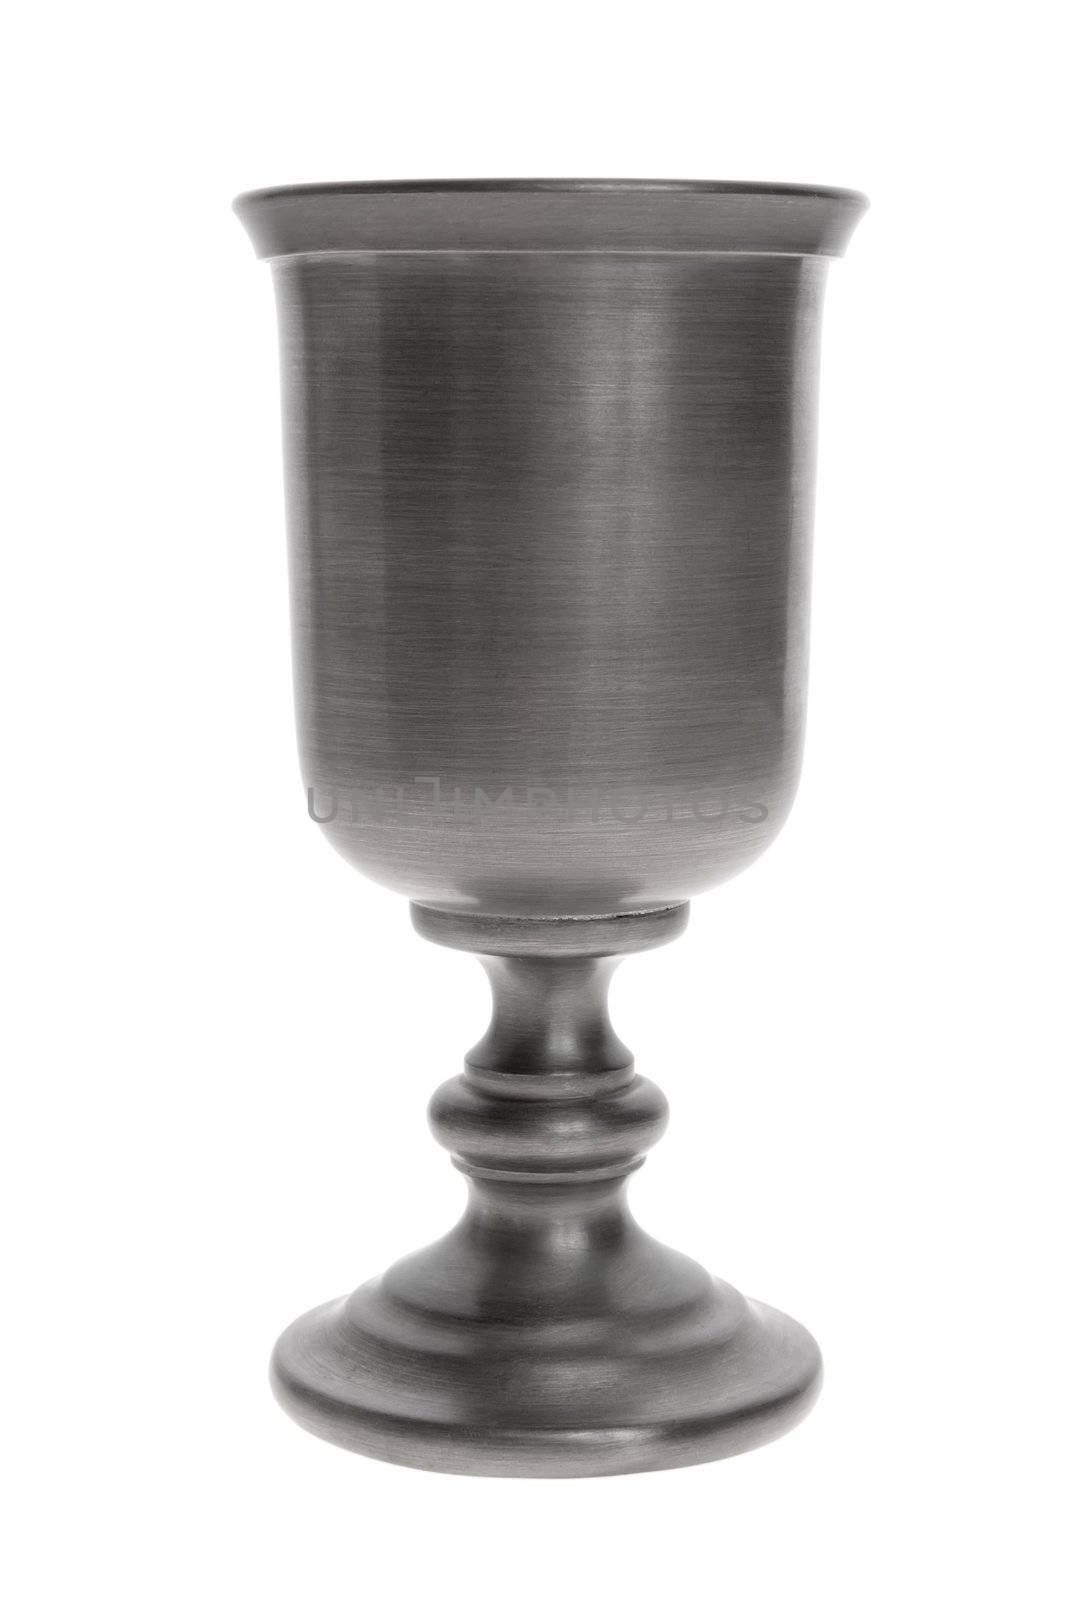 Classic goblet stands isolated on white background